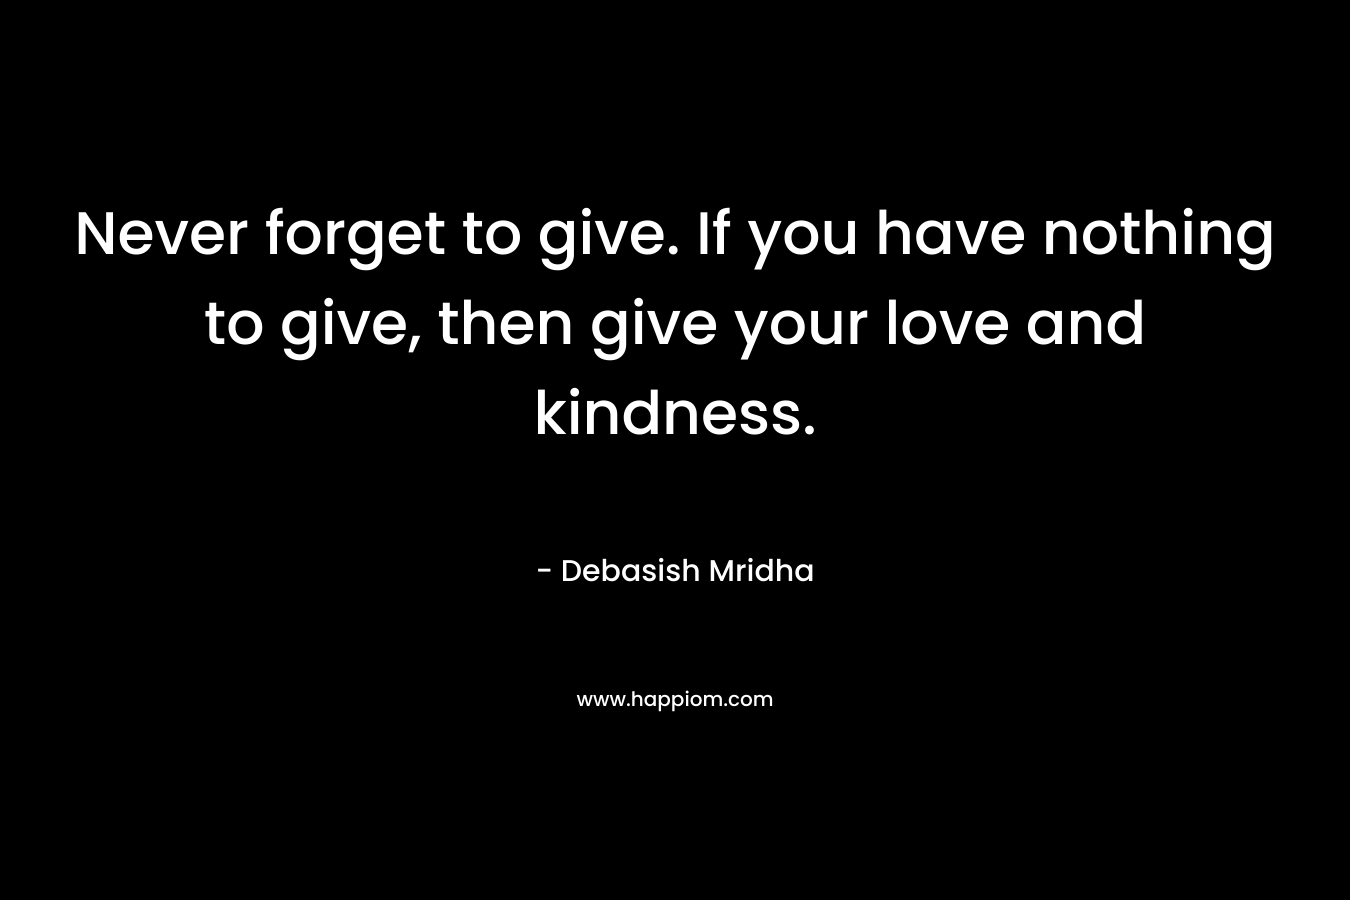 Never forget to give. If you have nothing to give, then give your love and kindness.